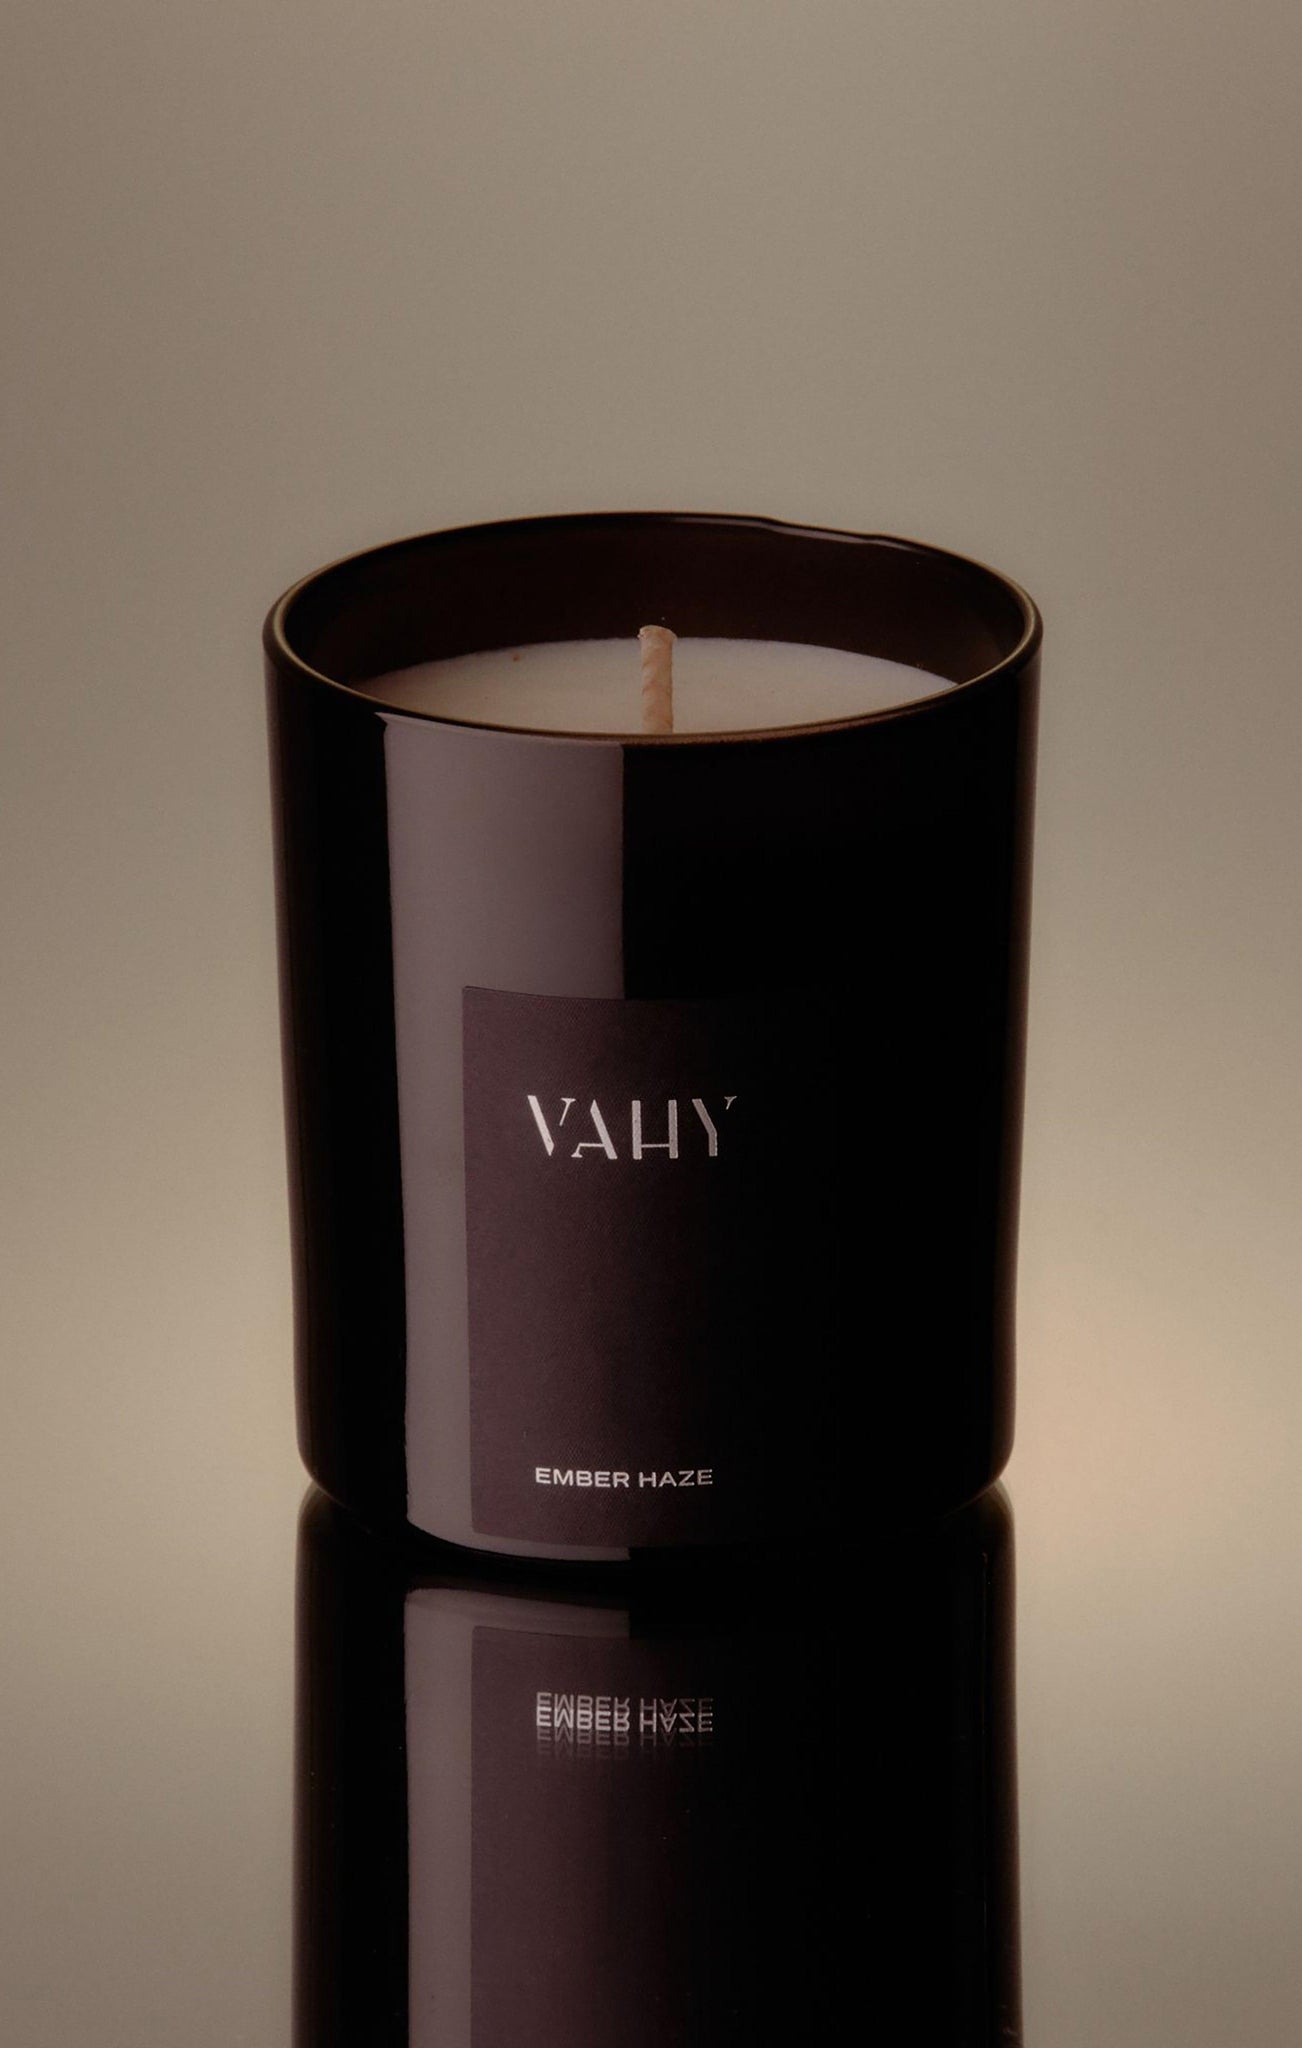 VAHY Ember Haze Scented Candle - Skin and Threads